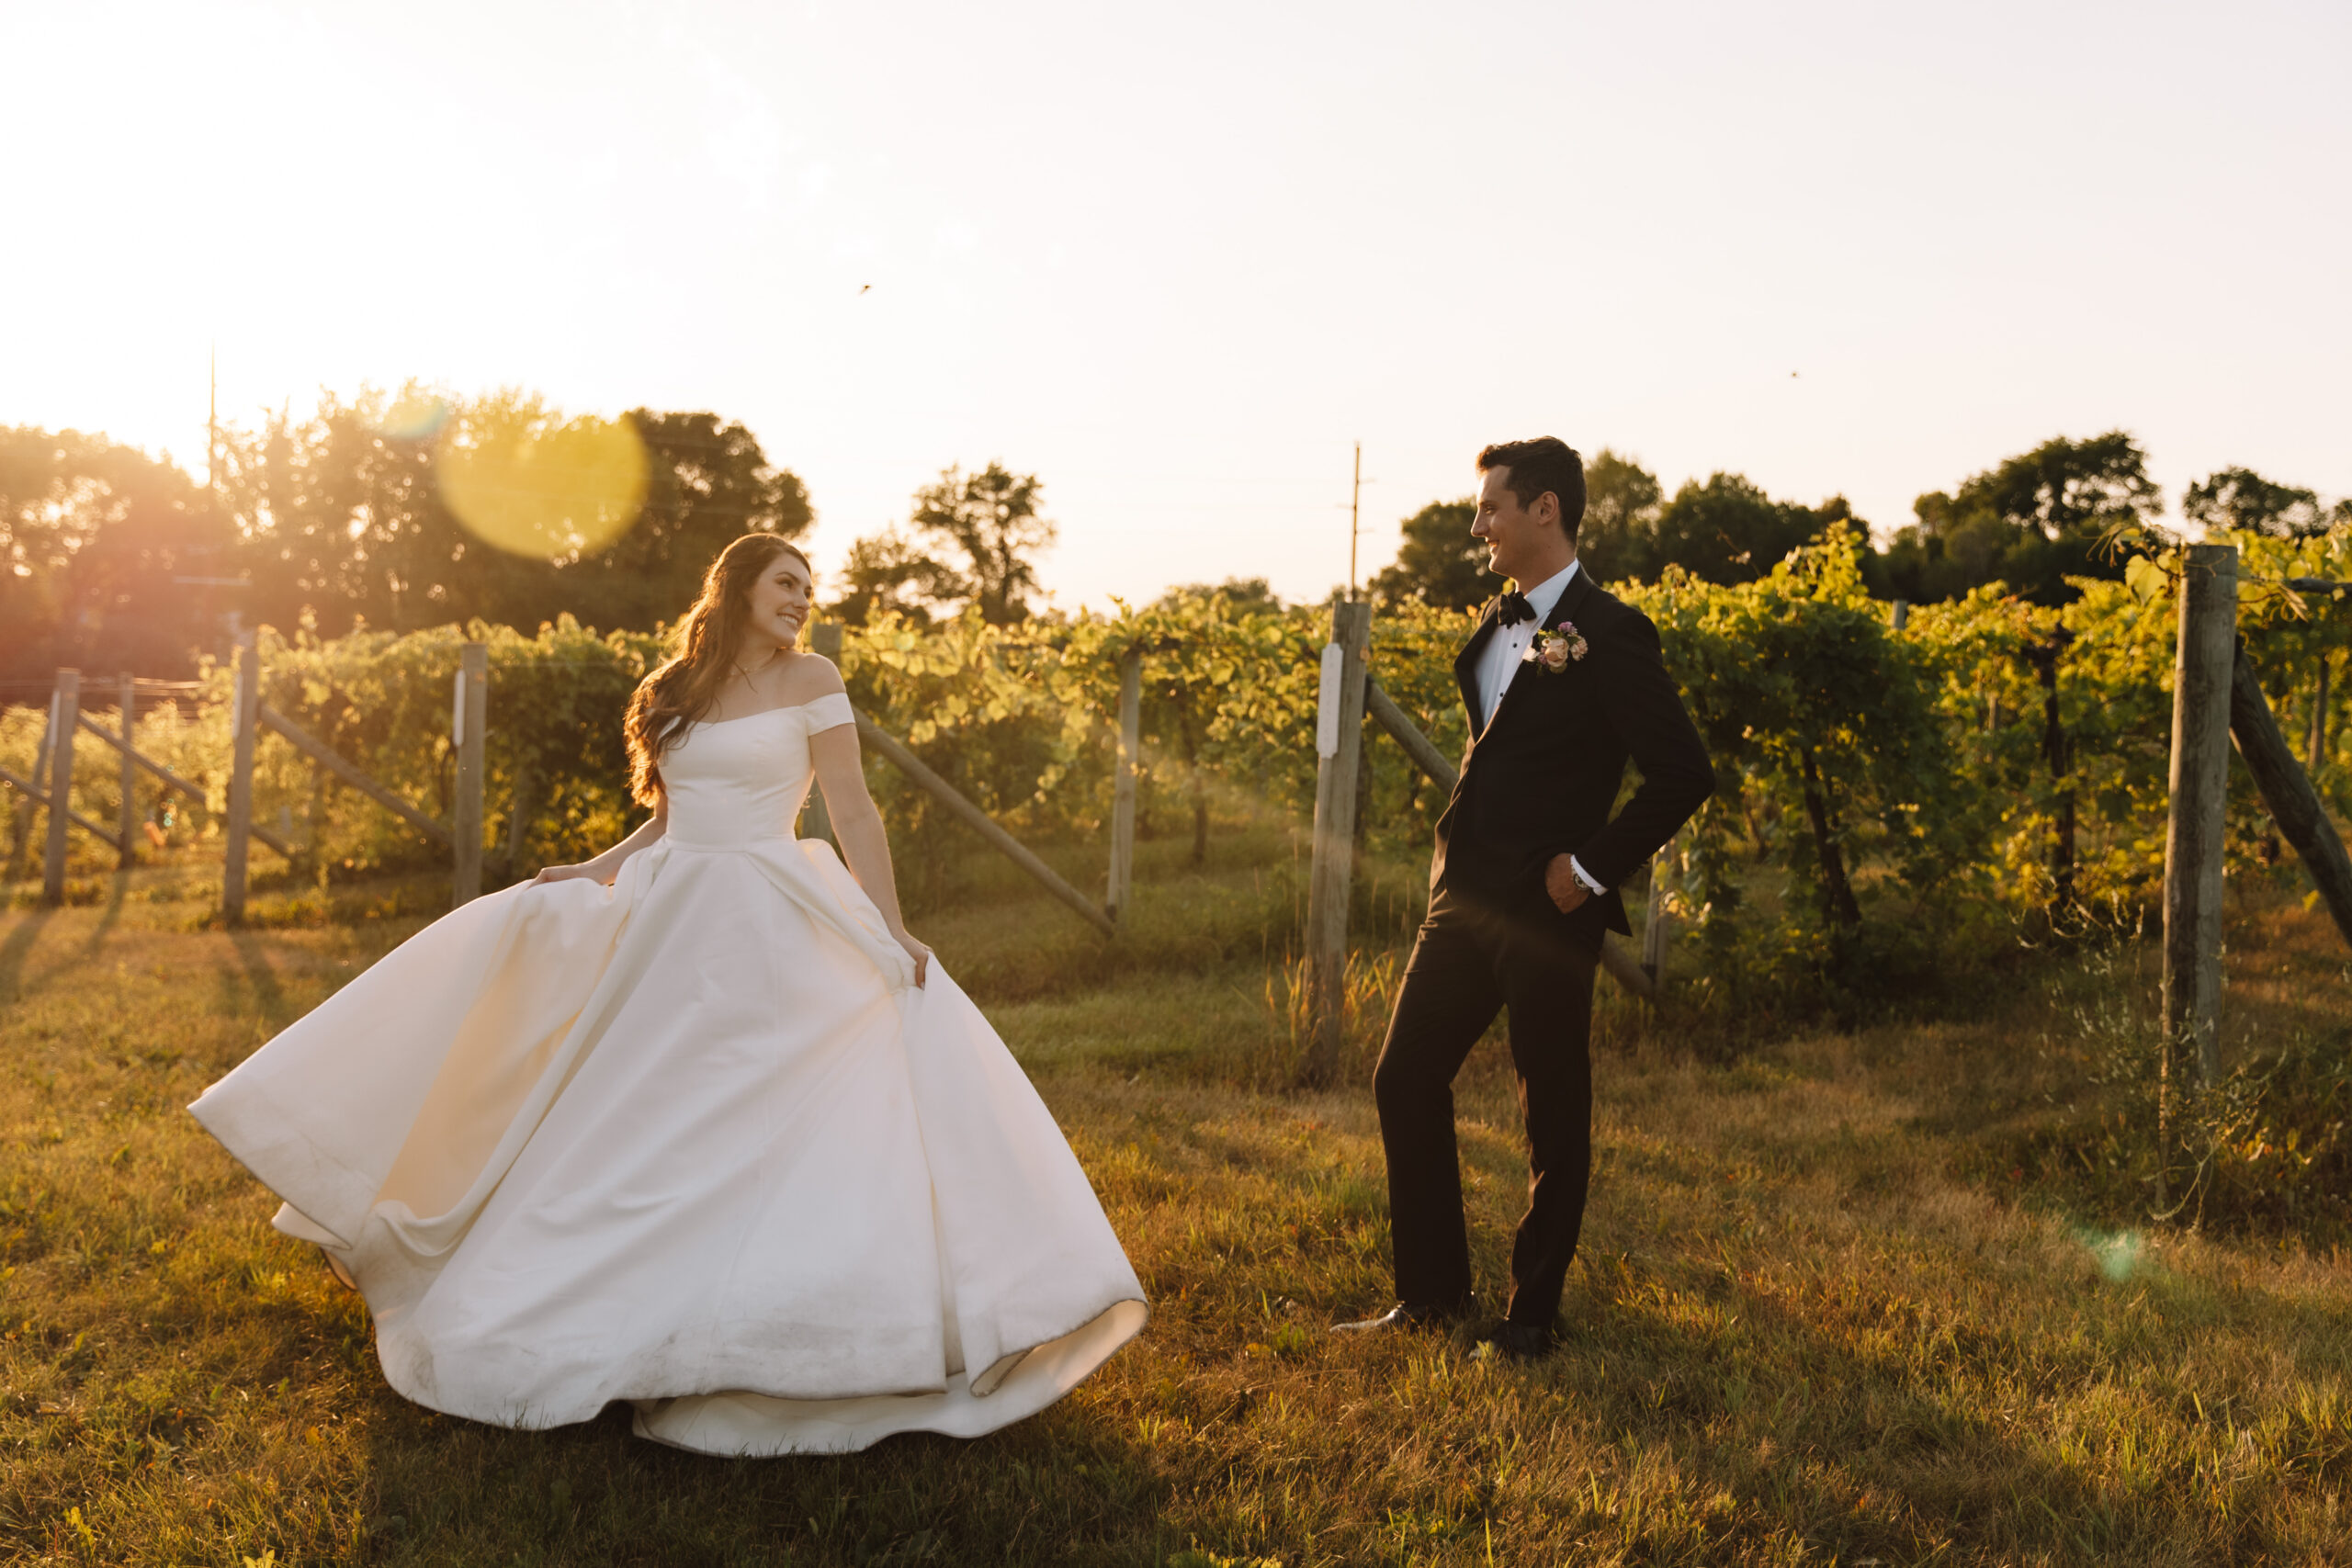 A beautiful bride twirling in her wedding dress in front of her husband in between the vineyards as the sun sets.